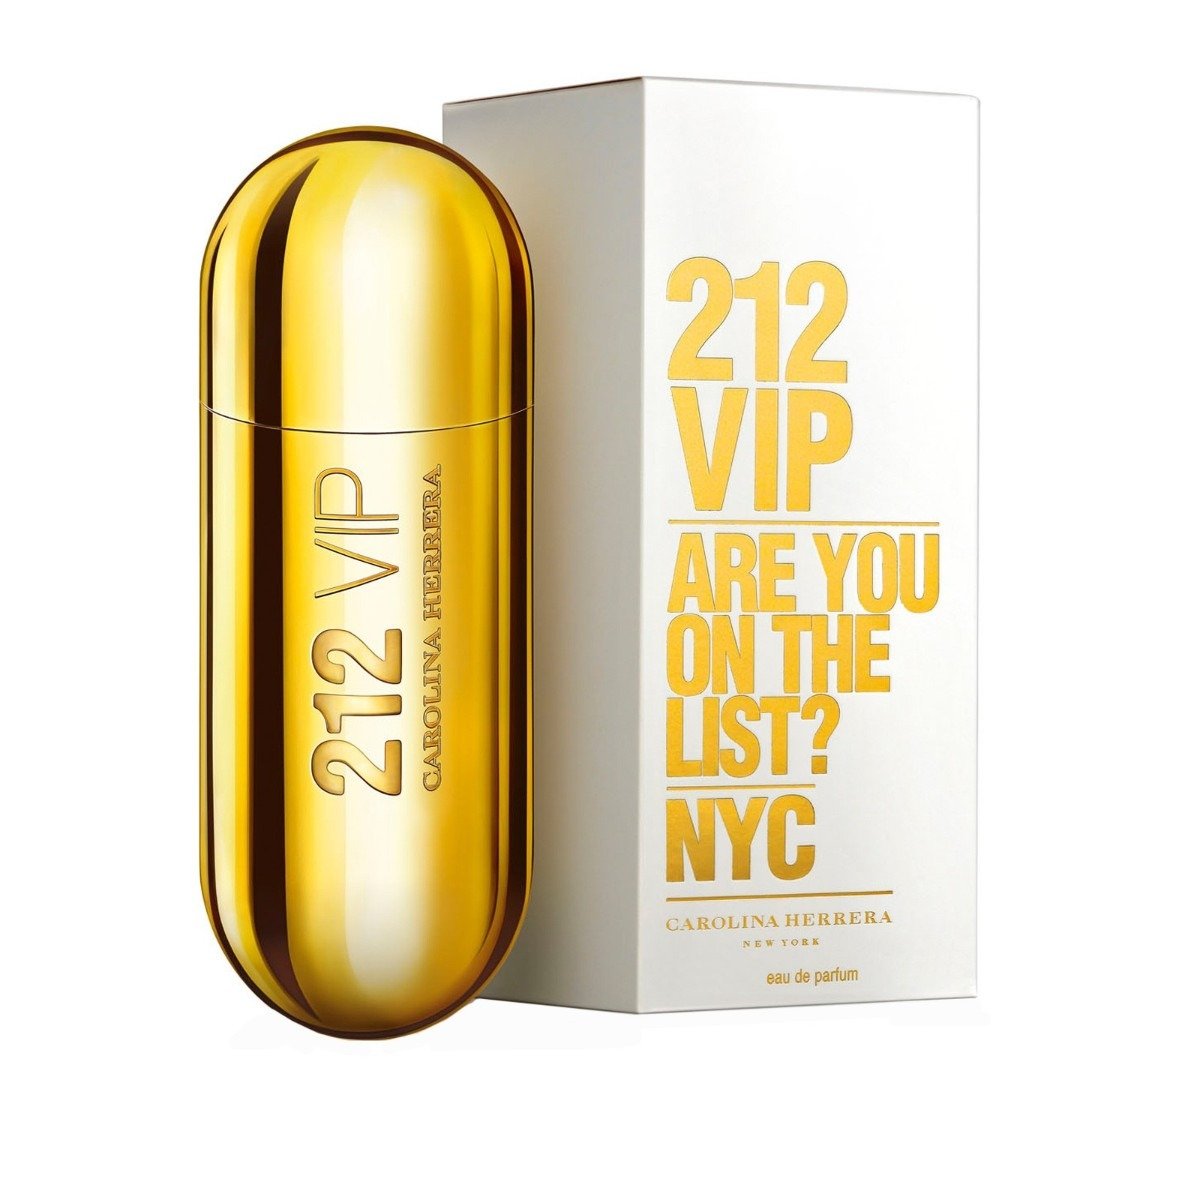 <meta charset="utf-8"><span data-mce-fragment="1">Carolina Herrera 212 VIP Eau de Parfum is an oriental vanilla fragrance created by the master Alberto Morillas, that combines sweet and woody not</span><span class="yZlgBd" data-mce-fragment="1">es. The perfume draws inspiration from New York youth - modern and stylish people that are always willing to have fun. Intense and ready to party, this perfume features the seductive rum together with passionfruit as the opening notes. Then, a soft heart of gardenia and musk leads you to the creamy base of vanilla and tonka bean.</span>